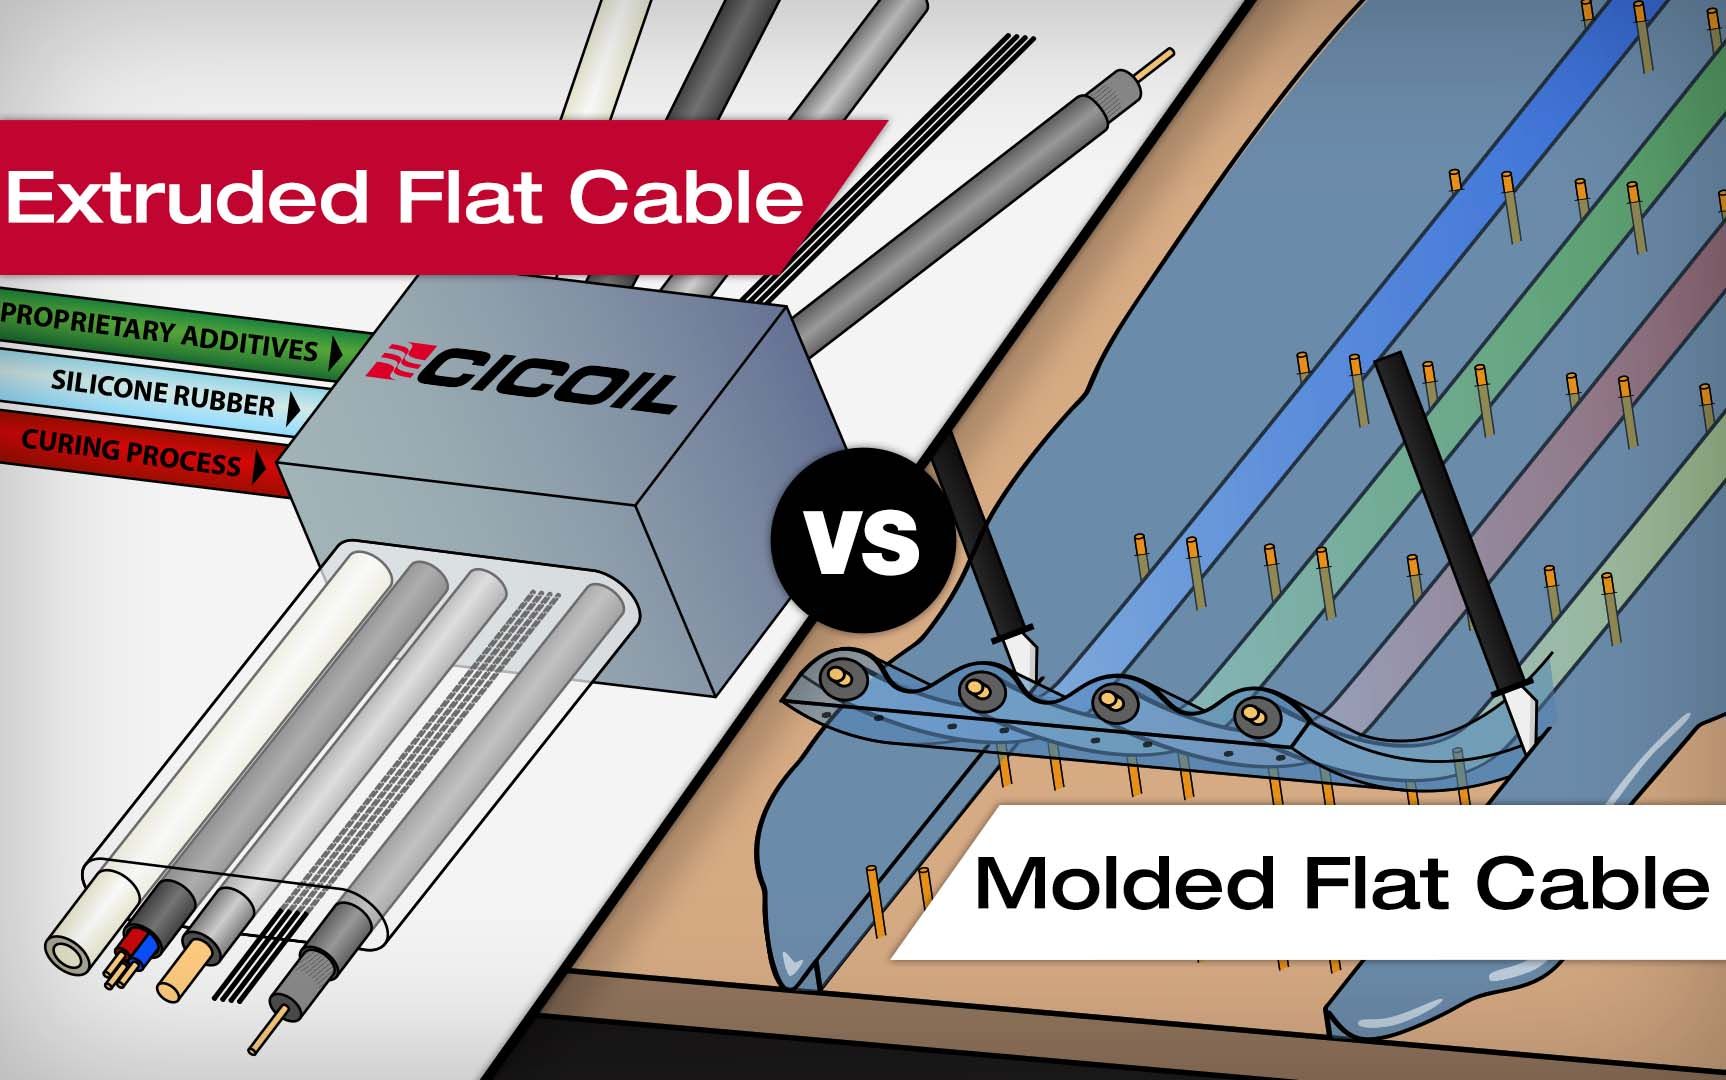 Extruded Flat Cable vs Molded Flat Cable